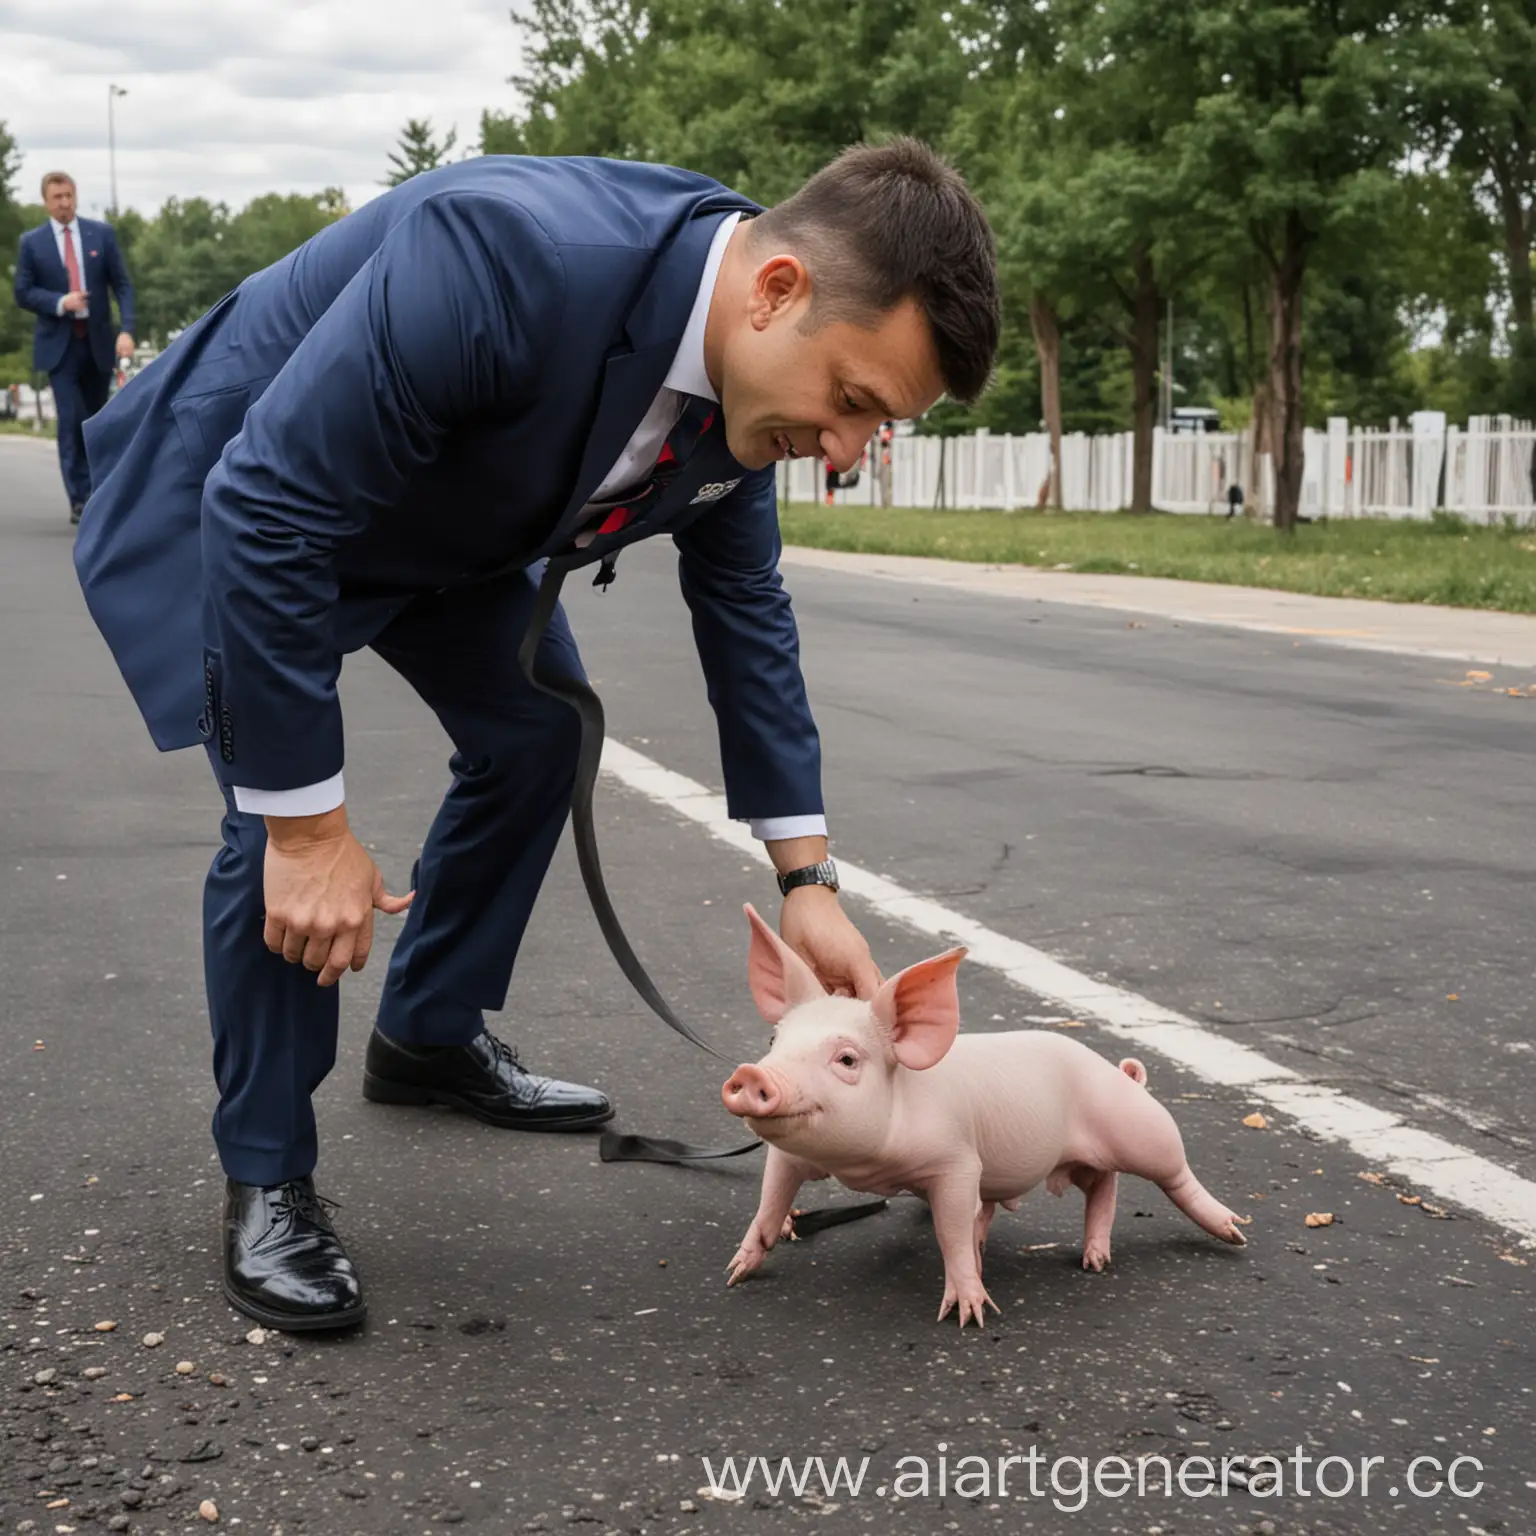 Vladimir-Zelensky-in-Political-Satire-with-Pig-Features-and-Leash